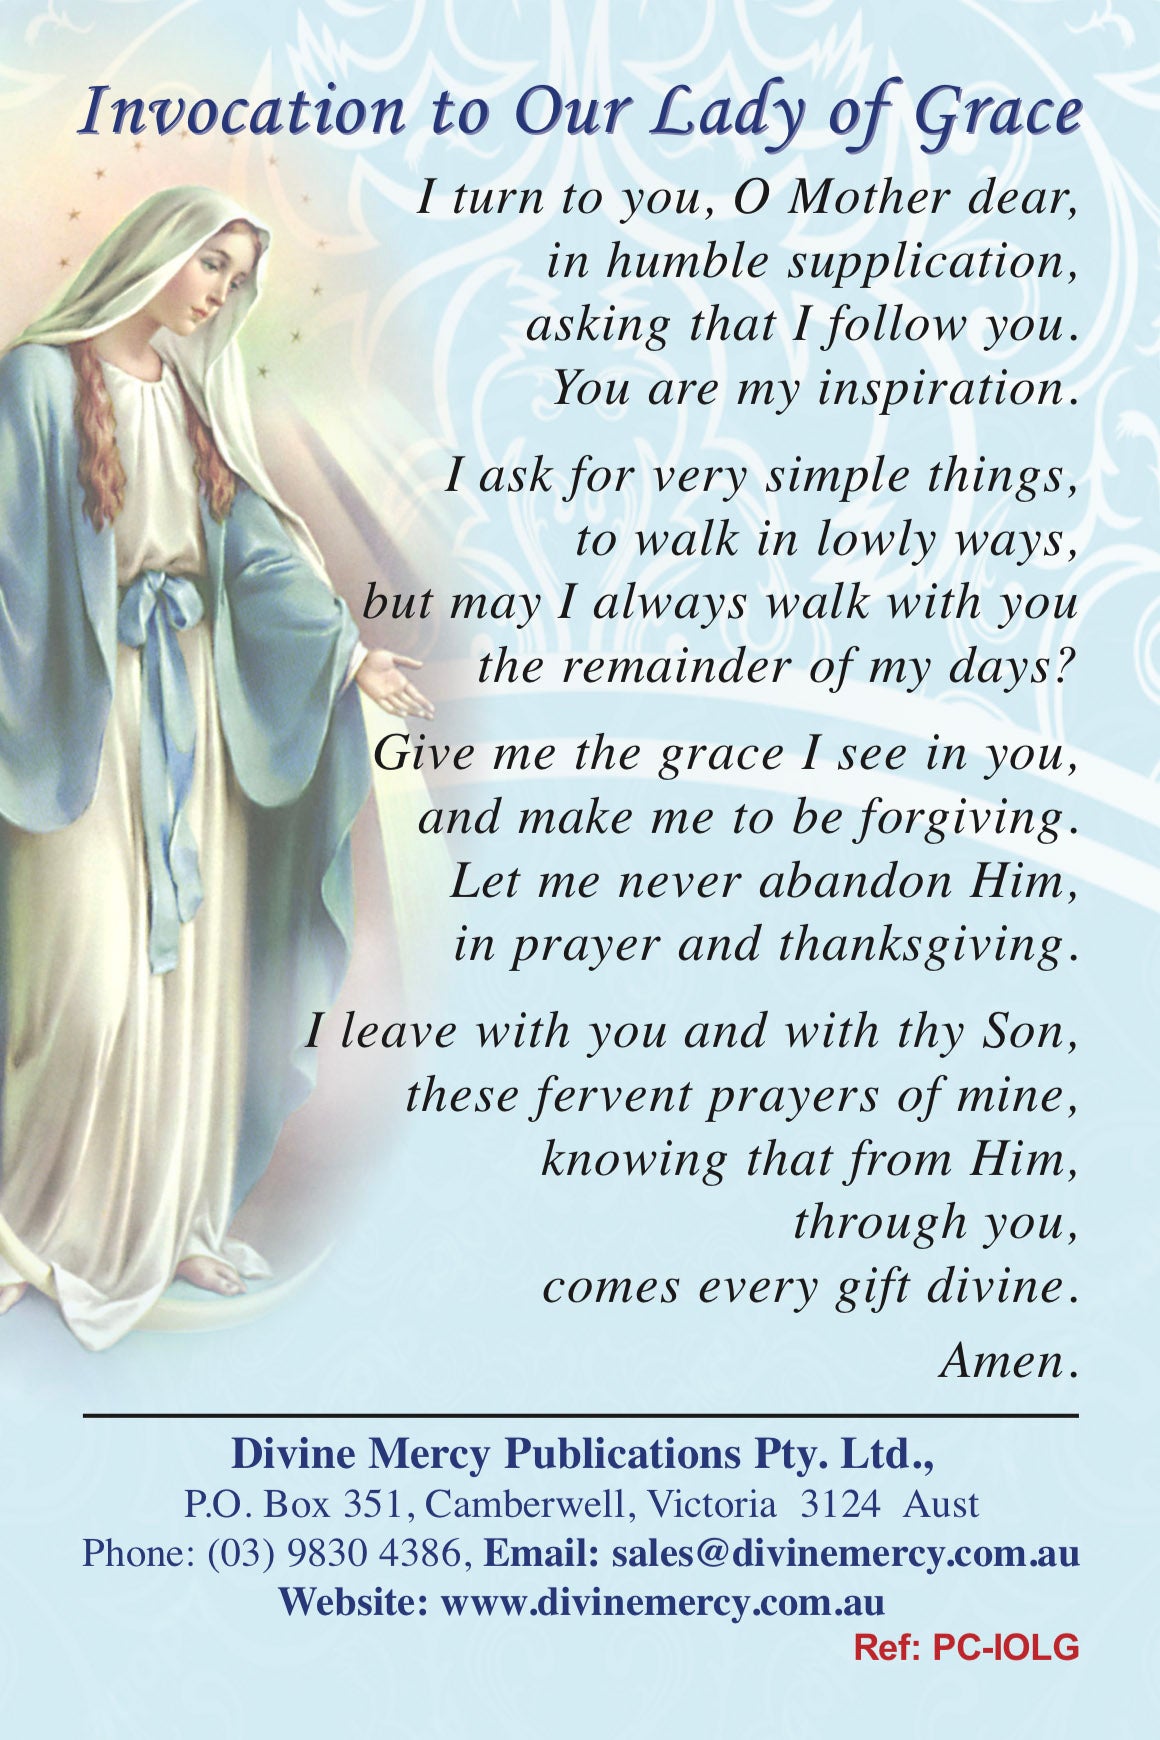 Invocation to Our Lady of Grace